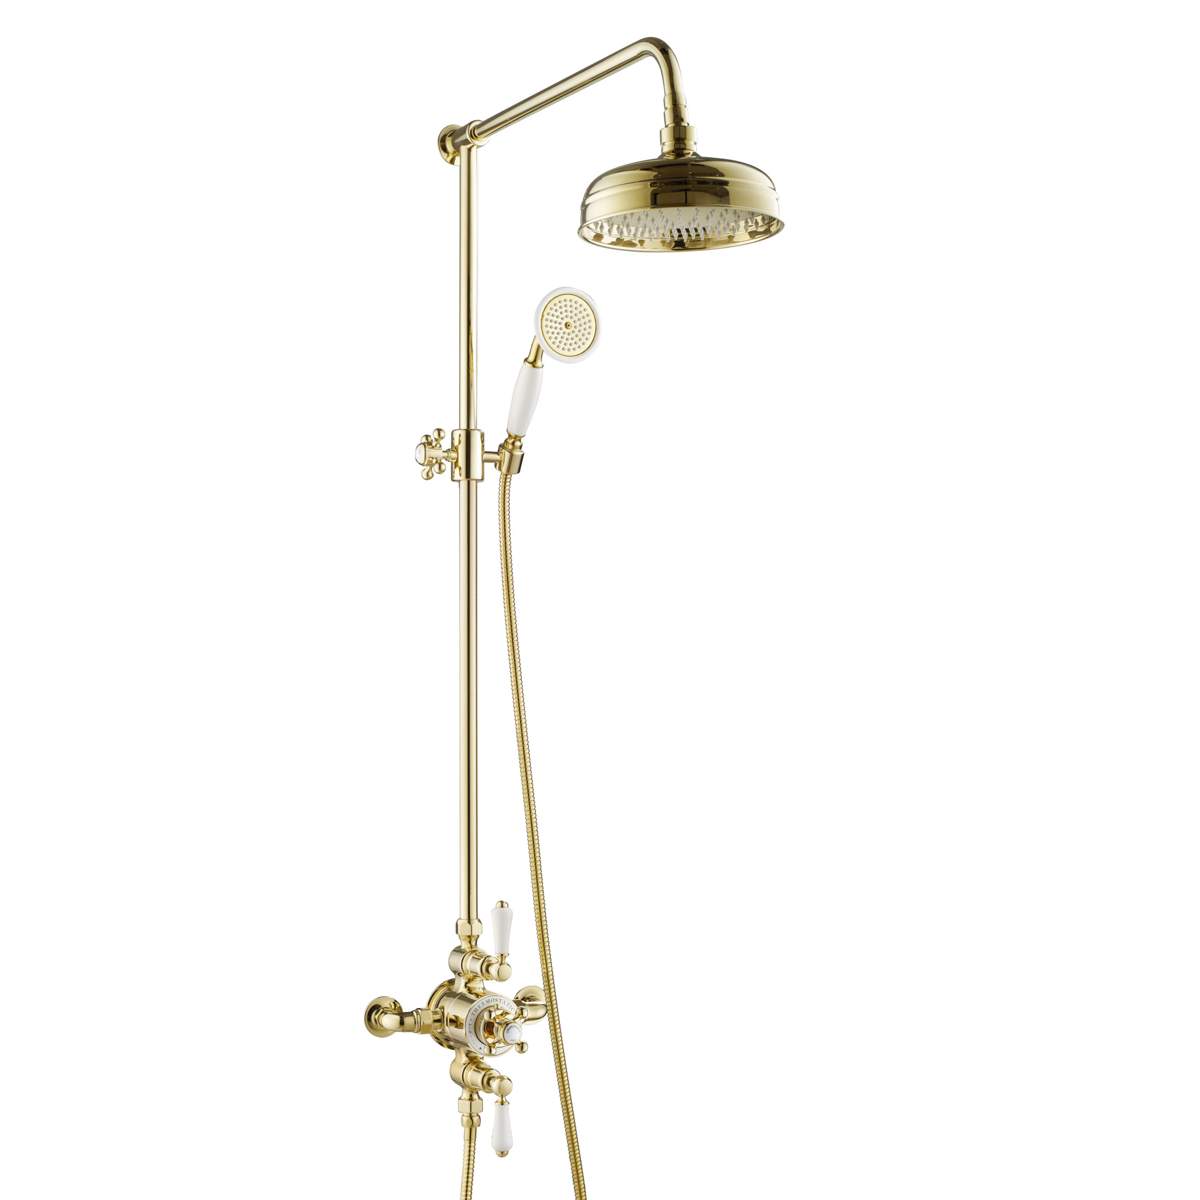 JTP Grosvenor Cross Antique Brass Edition Exposed Thermostatic Valve with Riser and Kit (GRO819G)